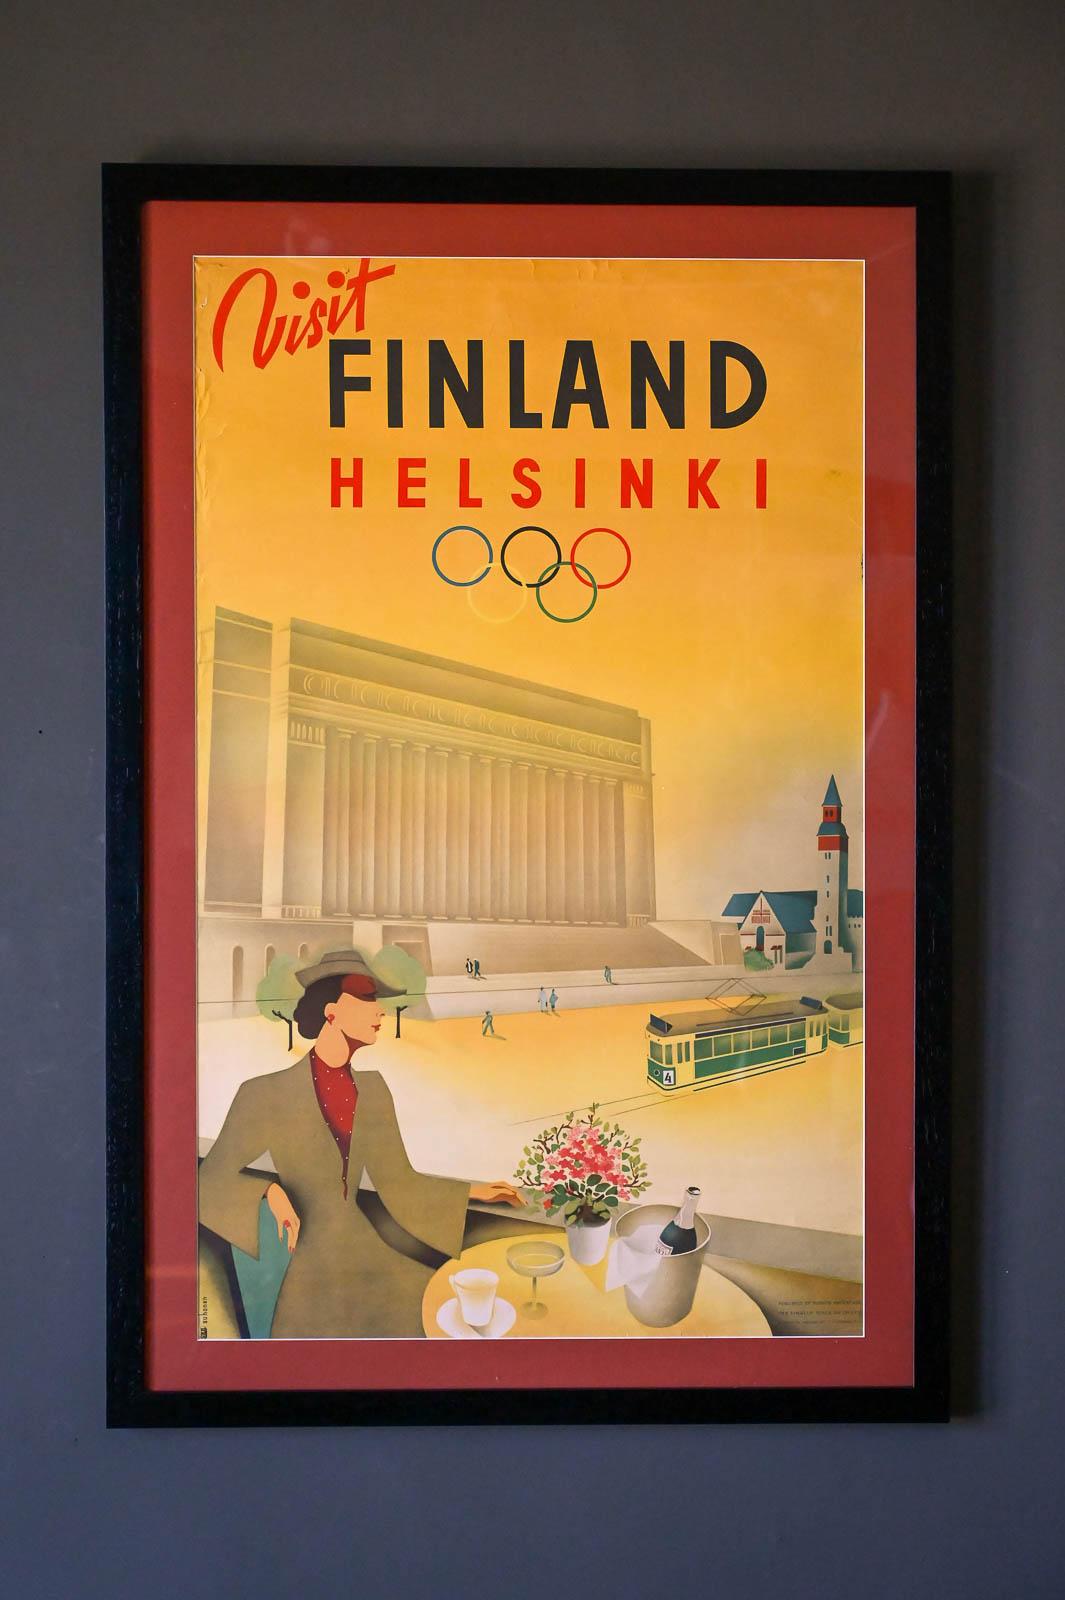 Original Finland travel poster by Jorma Suhonen (1911-1987), 1952 Fully expecting to host the Olympic Games in 1940, the Finnish Olympic advertising machine was in full gear. However, this image, depicting Helsinki's Parliament House and exhibiting